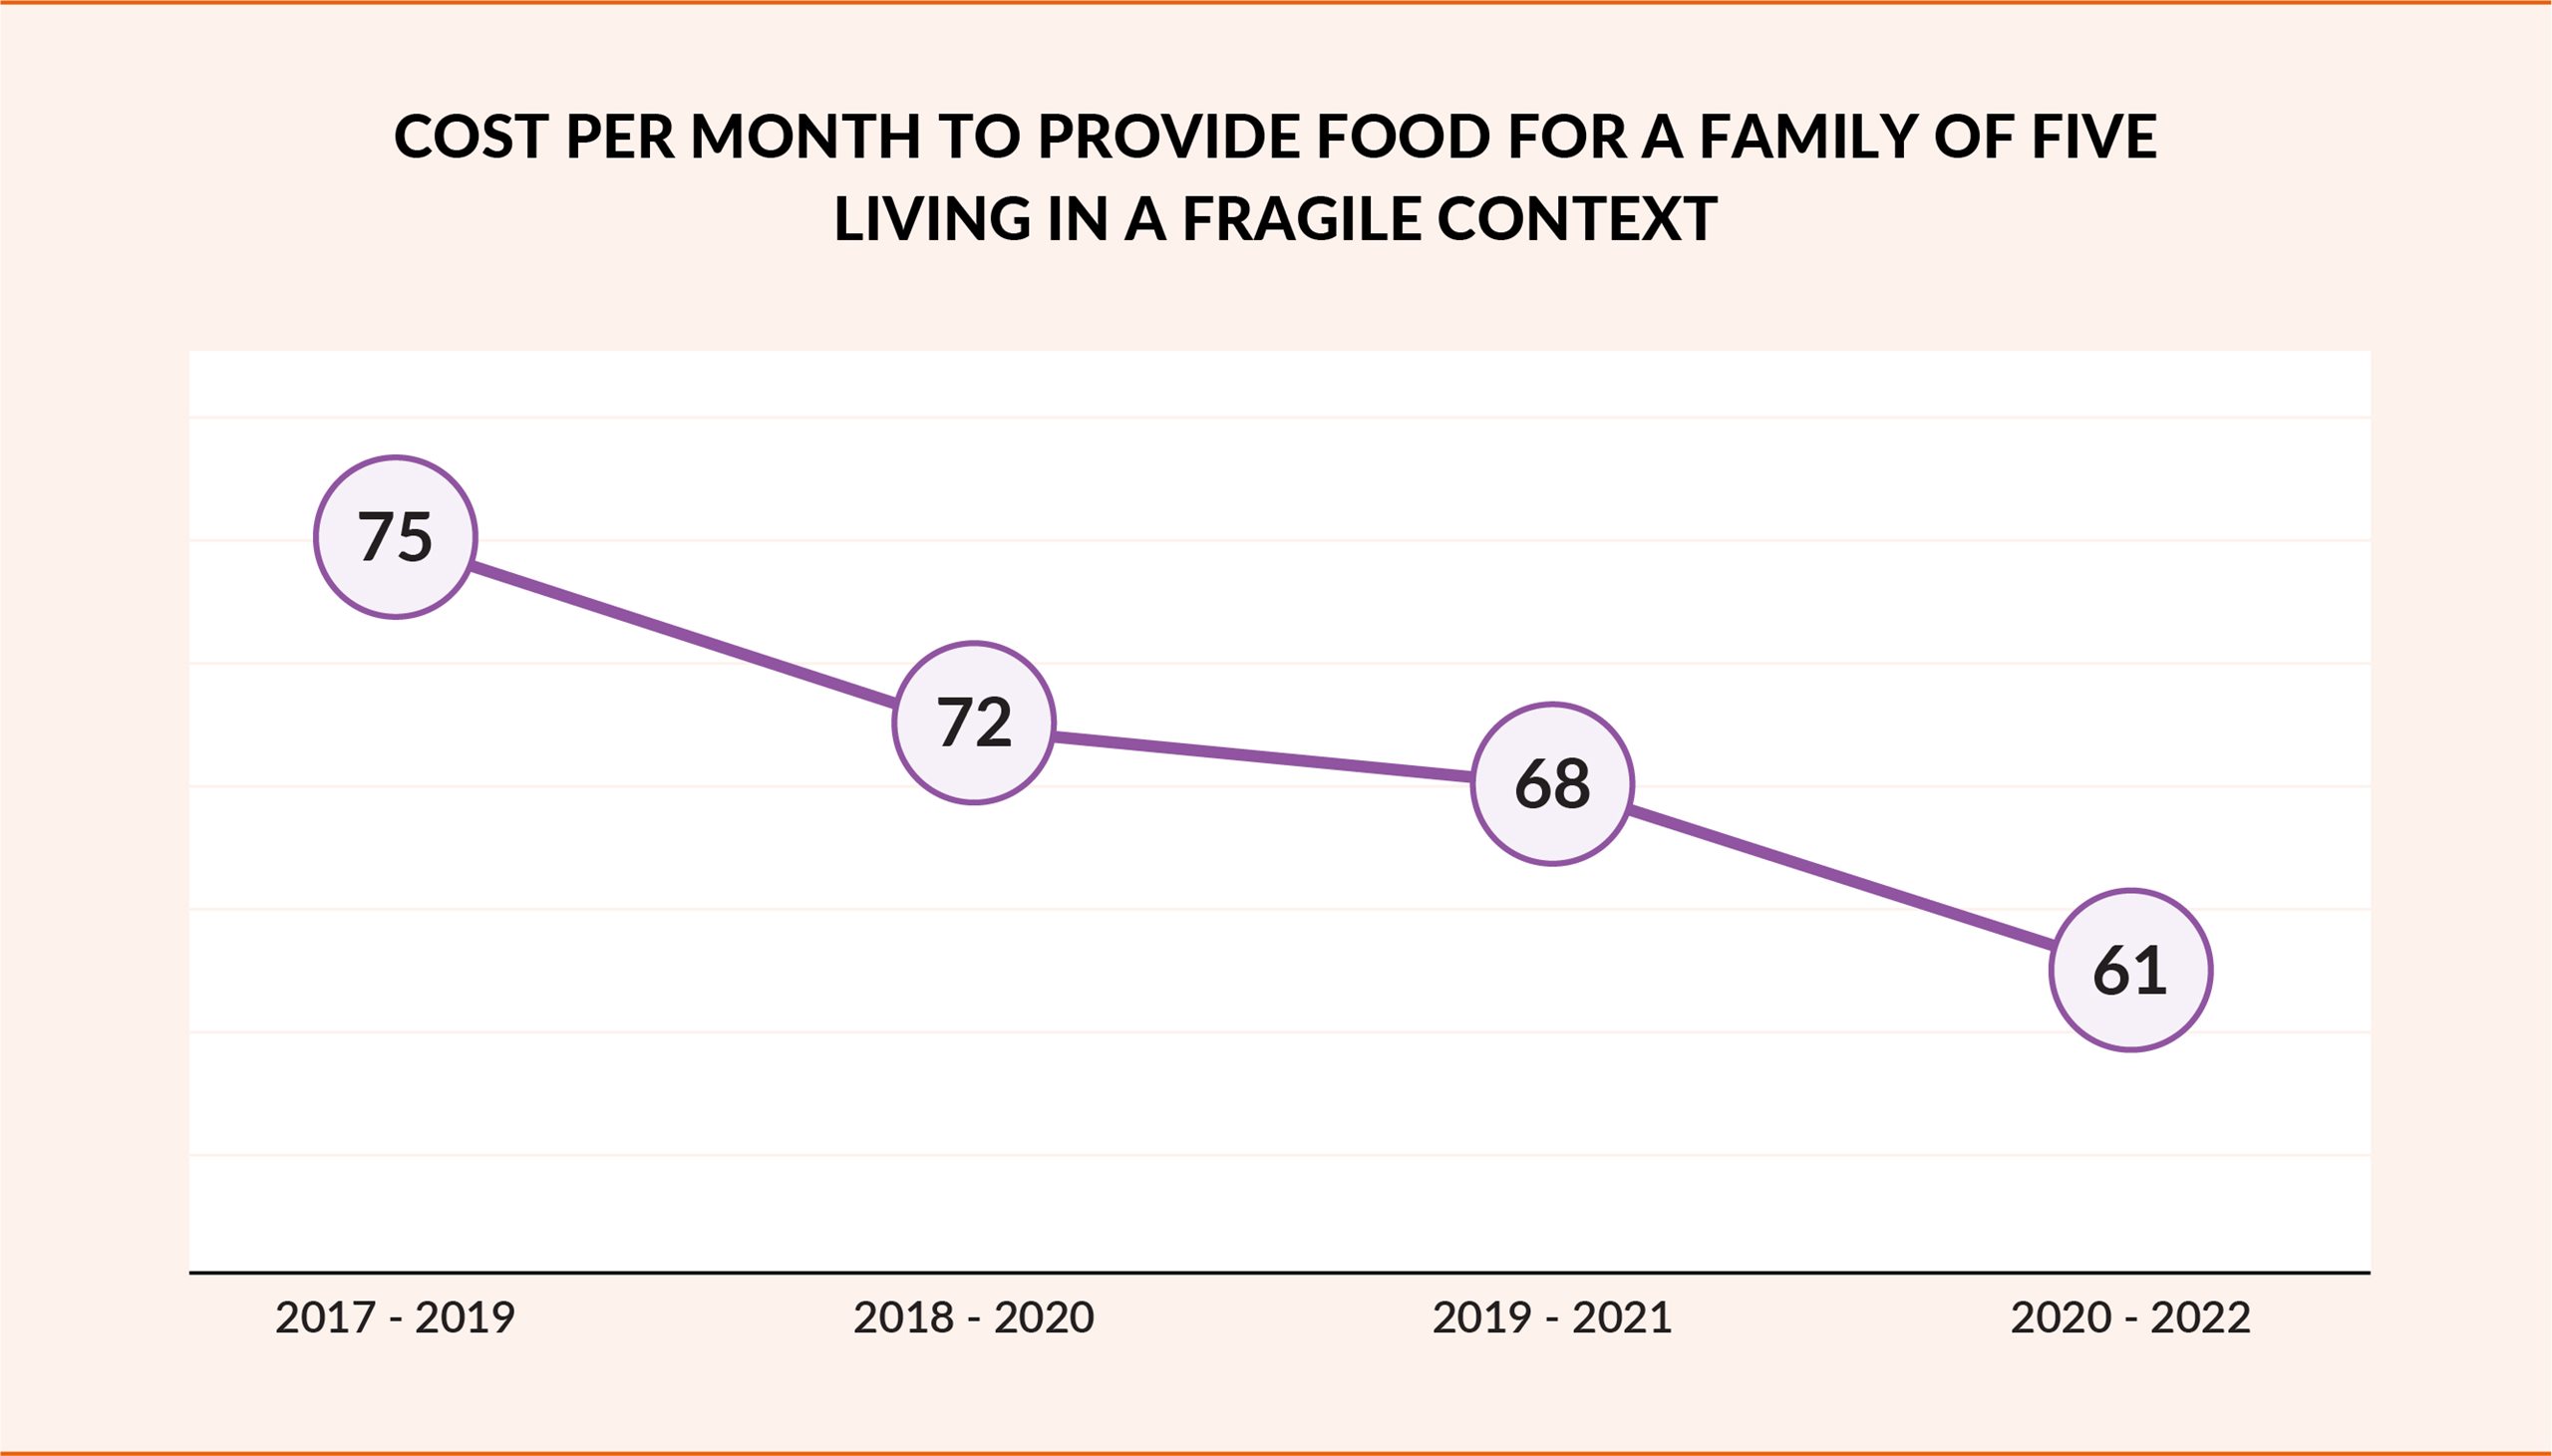 Graph shows the cost per month to provide food for a family of five living in a fragile context moving from $75 to $61 across a six-year span.